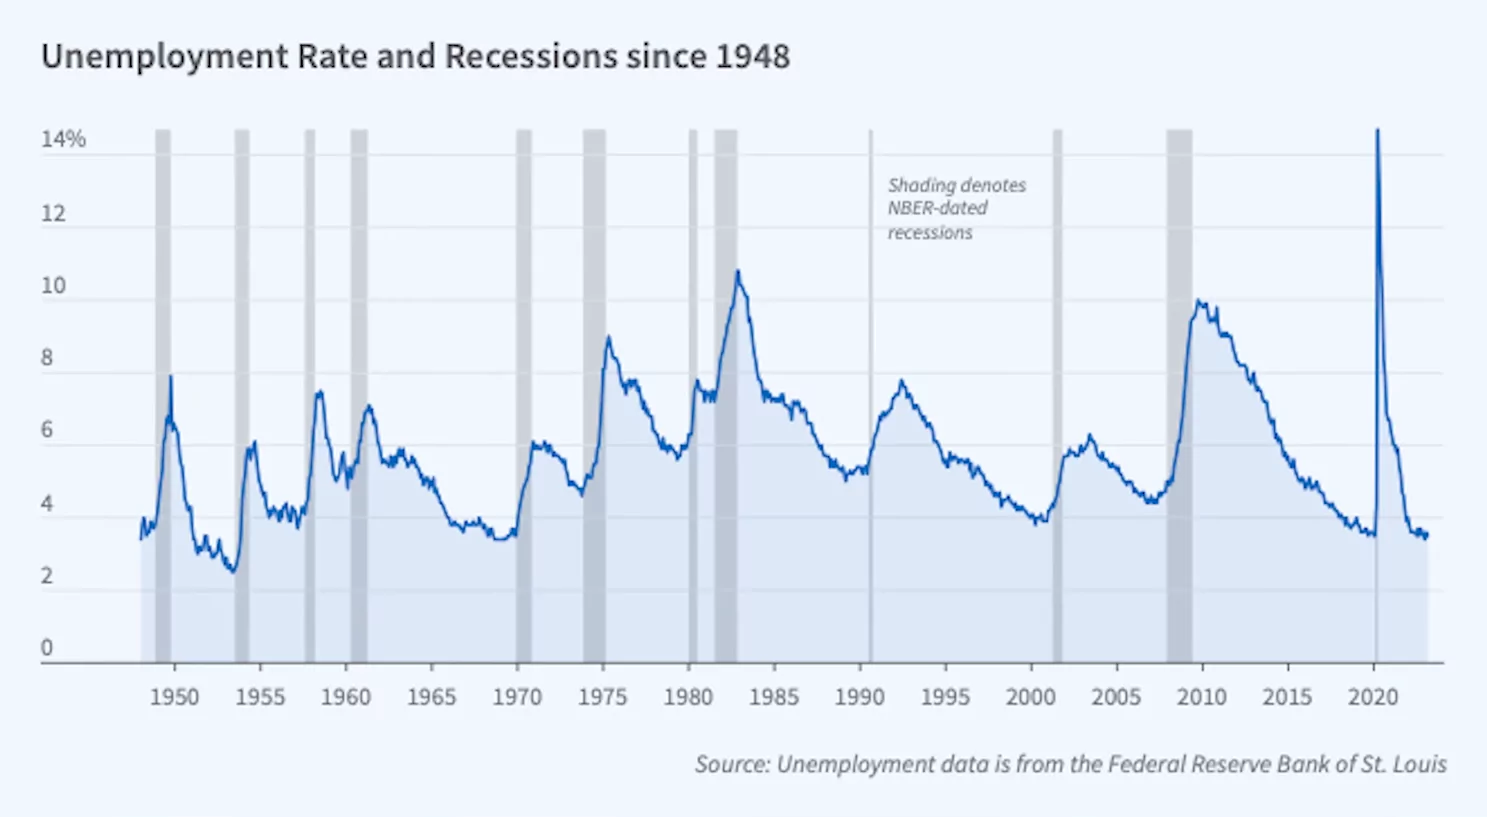 Unemployment Rate and Recessions since 1948